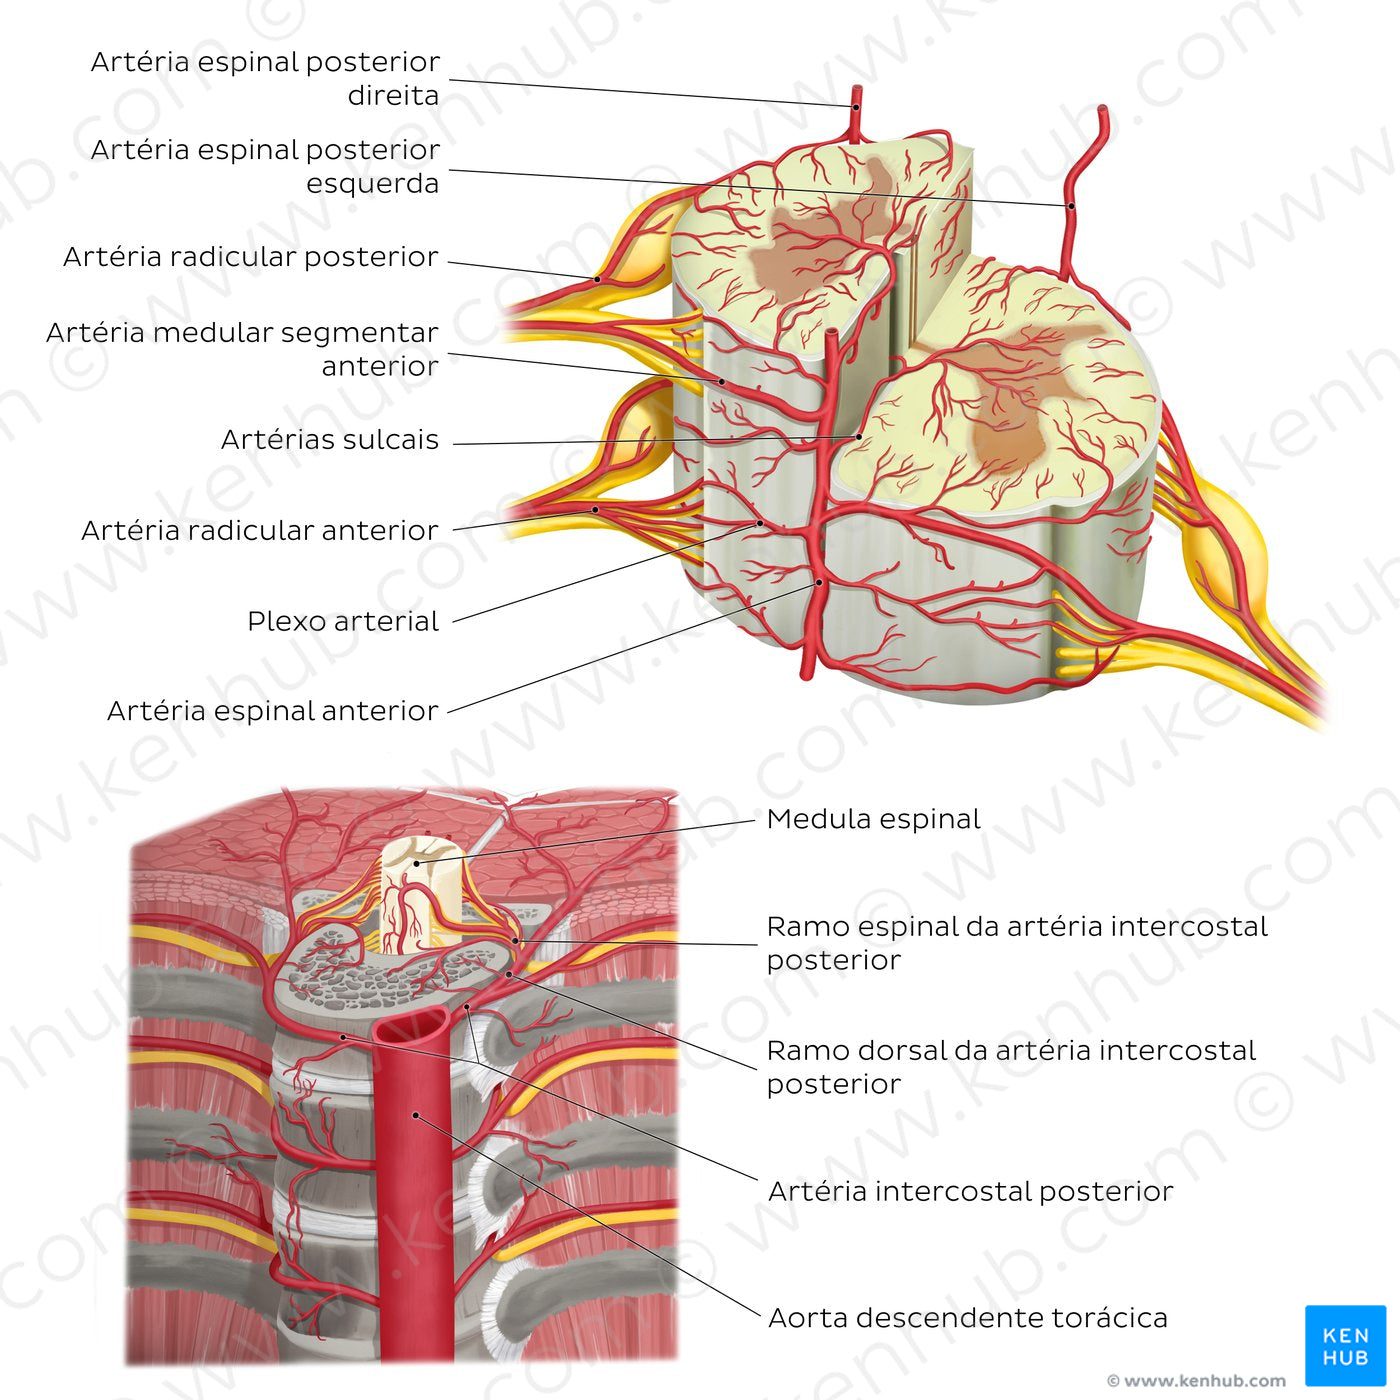 Arteries of the spinal cord (Portuguese)